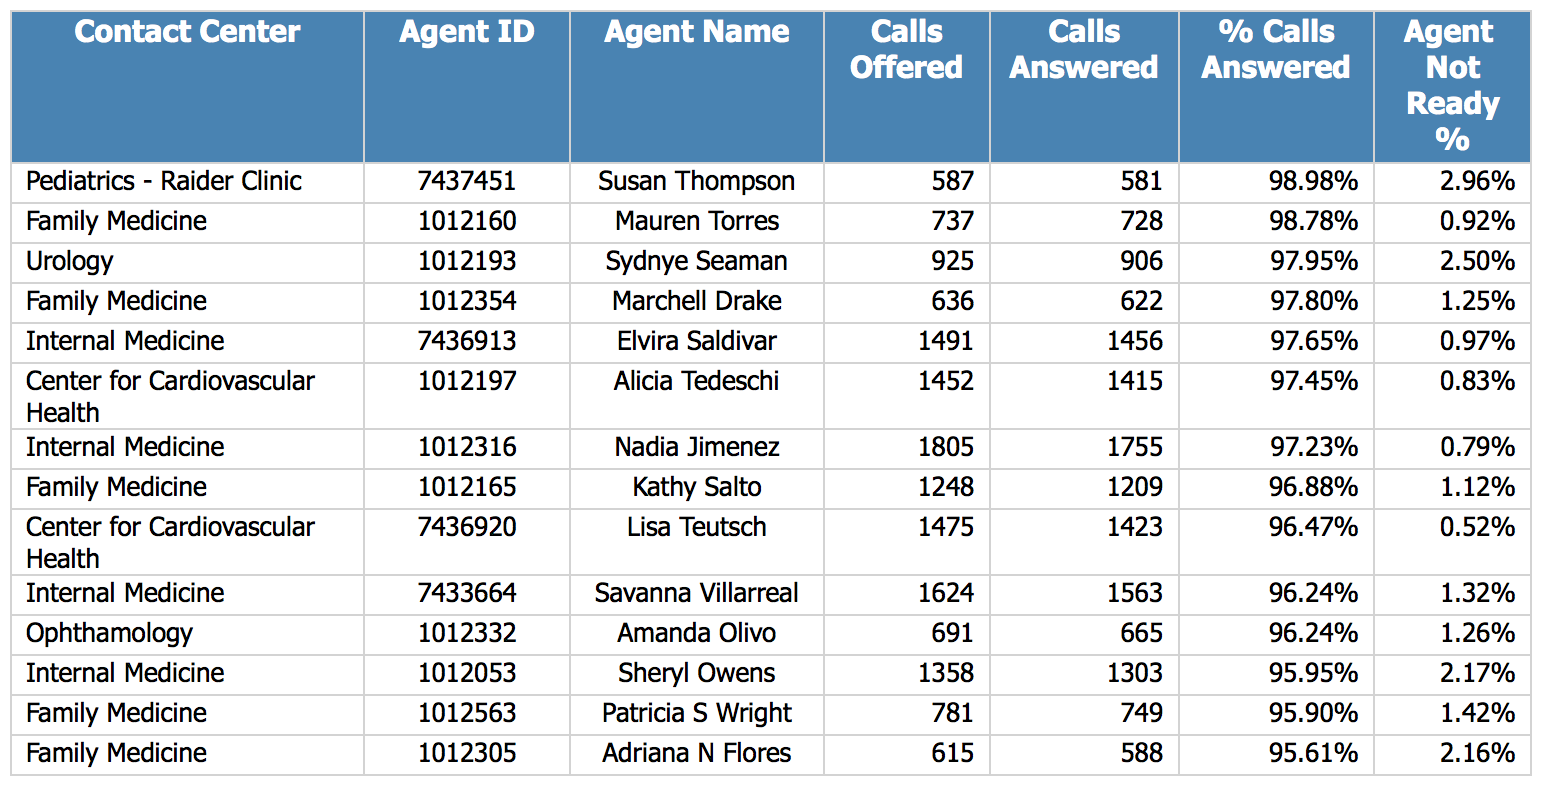 Top Call Agents for September